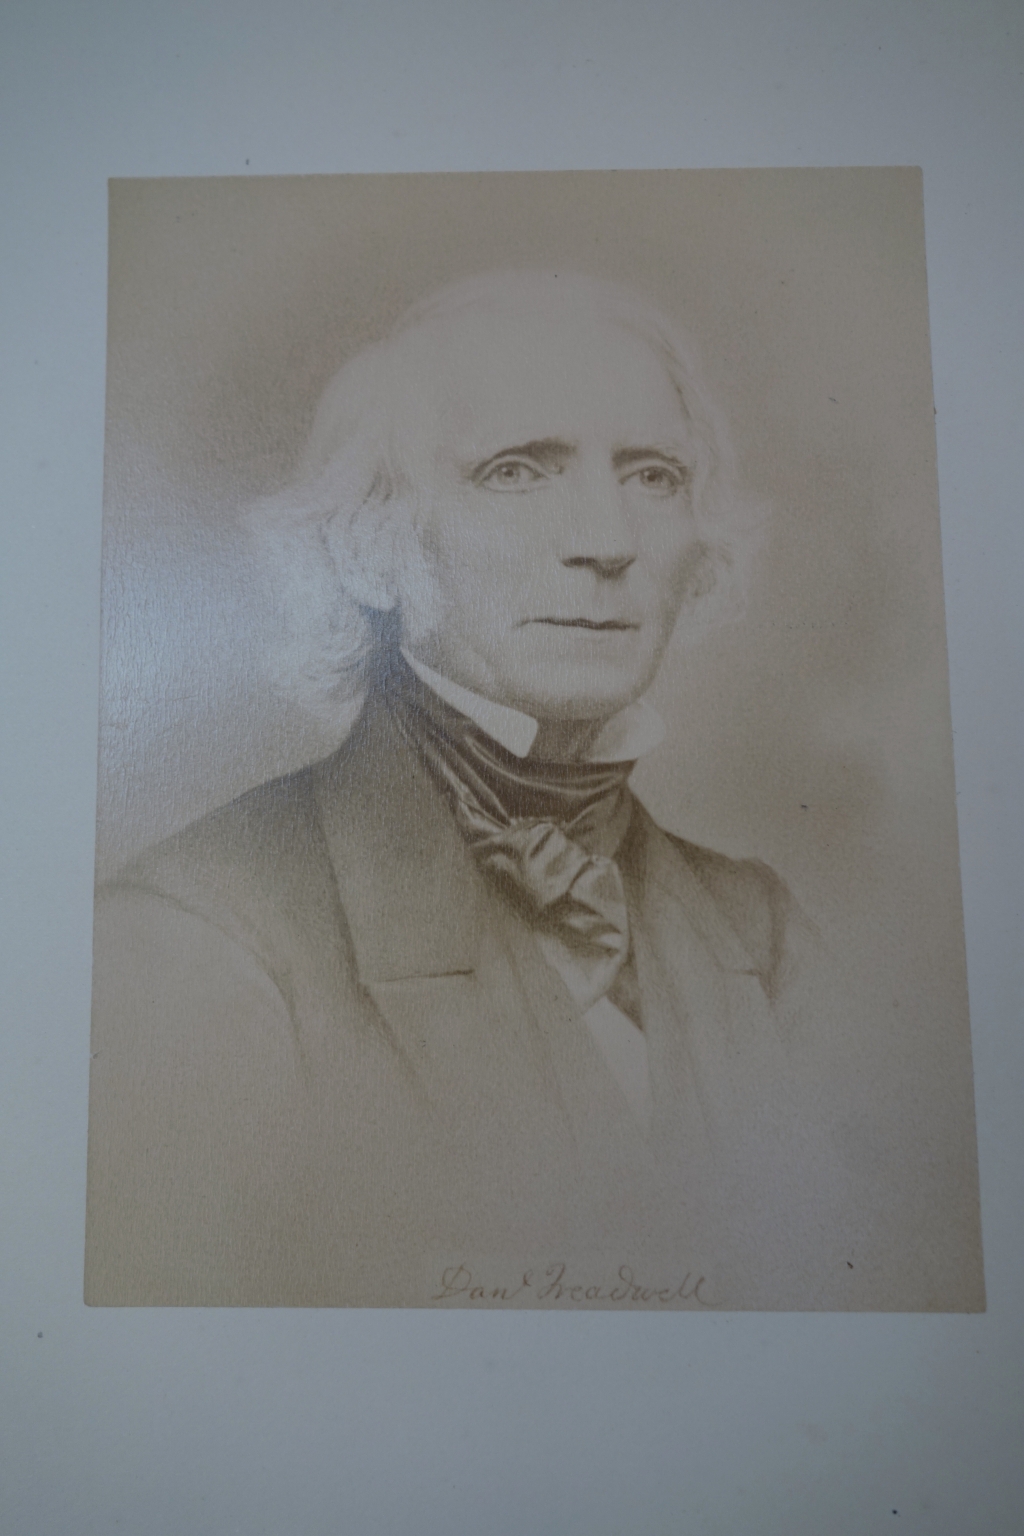 Portrait of Treadwell reproduced photographically as the frontispiece for Wyman